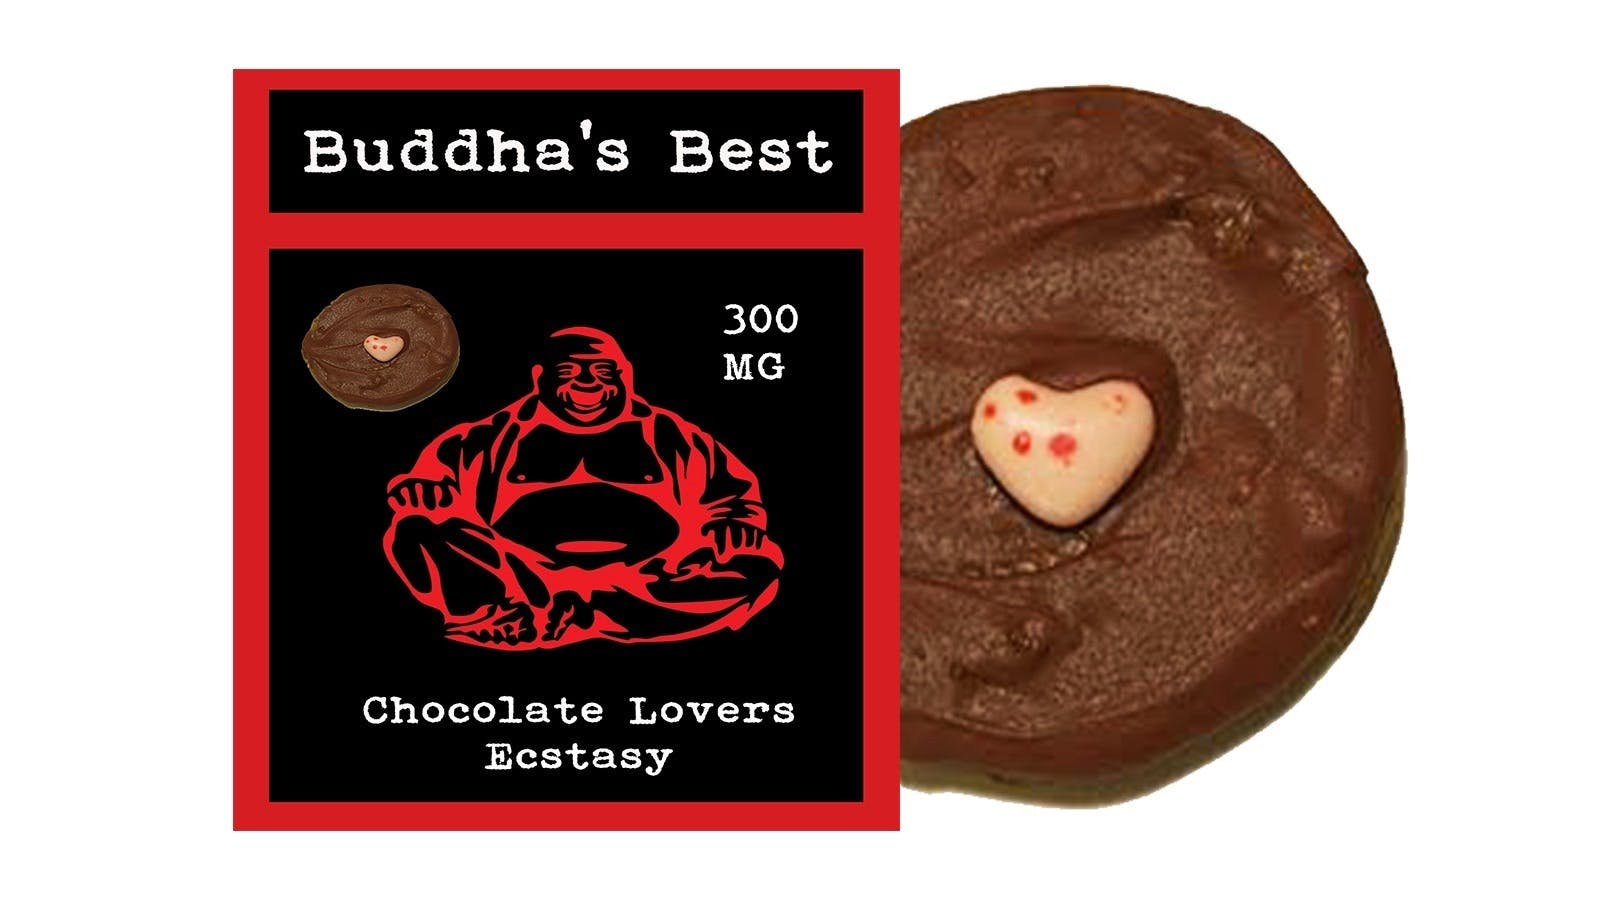 edible-buddhas-best-chocolate-ecstasy-lover-cookie